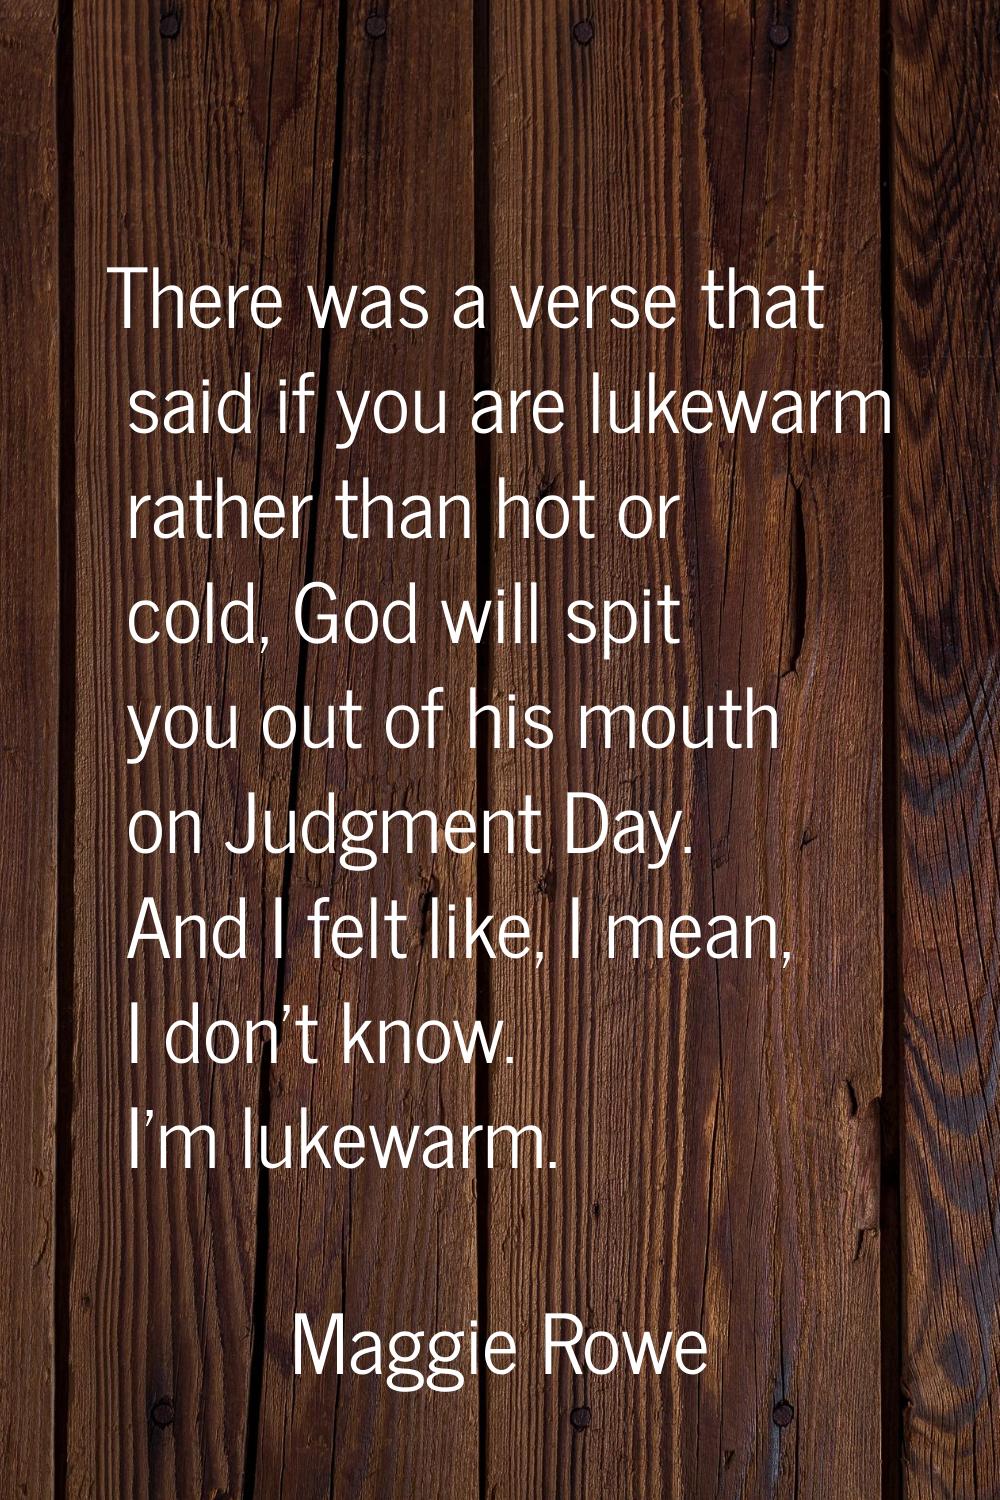 There was a verse that said if you are lukewarm rather than hot or cold, God will spit you out of h